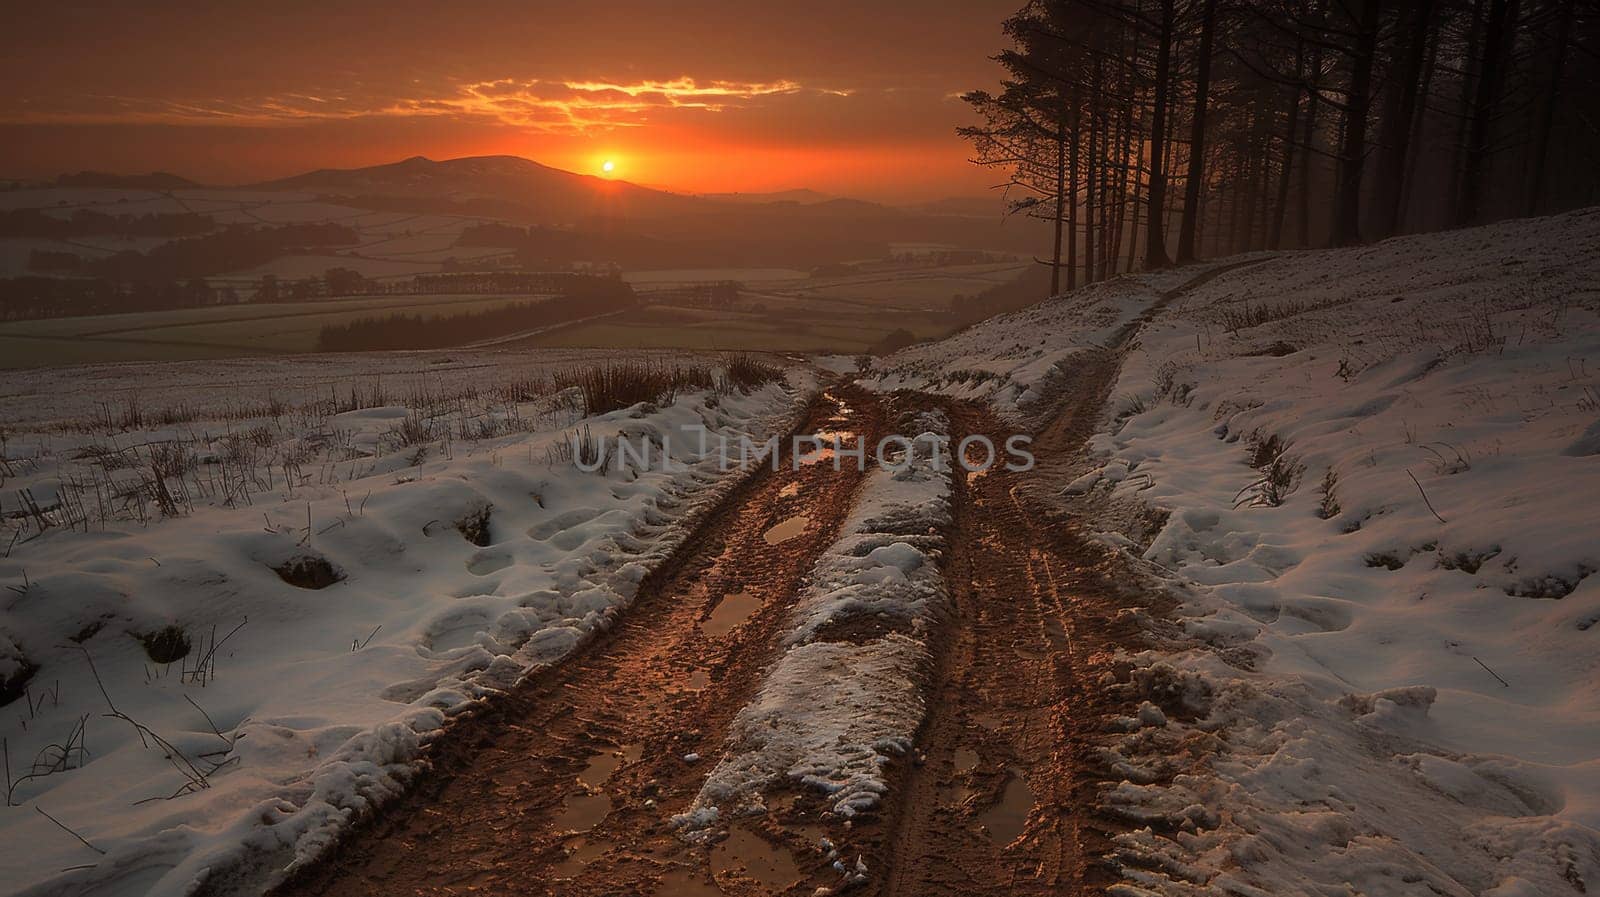 A snowy road with a sunset in the background